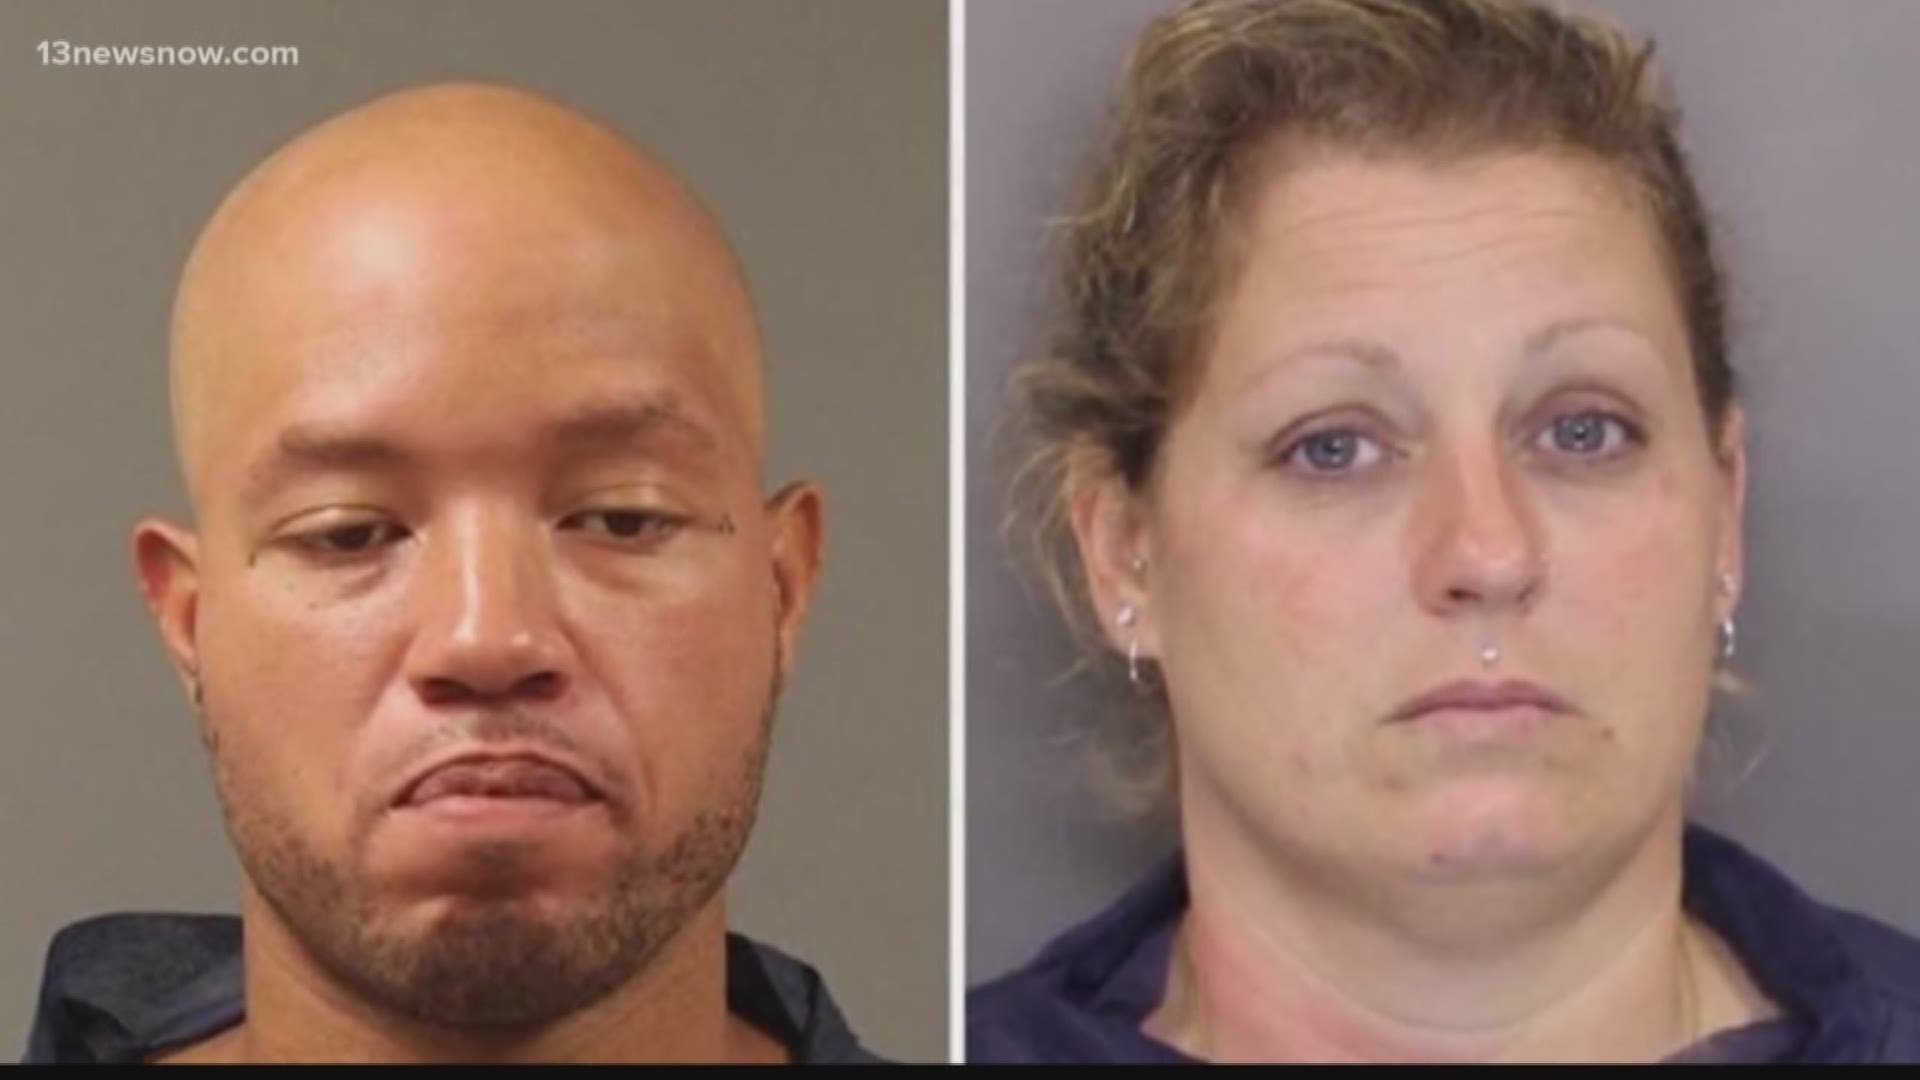 More twists in the police chase in Maryland that led investigators two a pair of violent crimes in Hampton Roads.